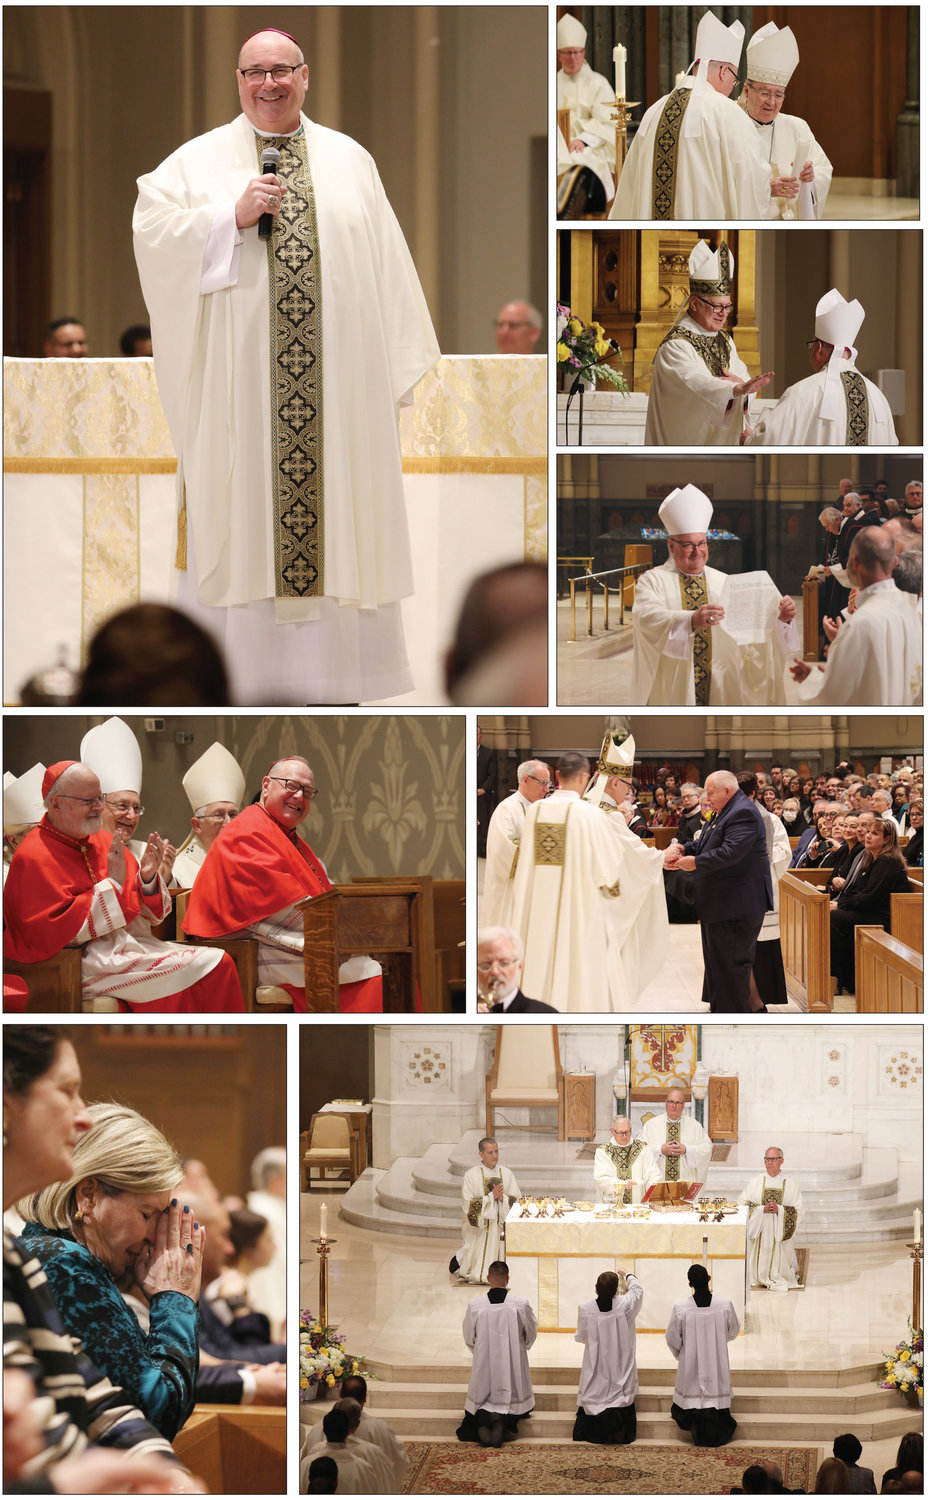 Clockwise, from top left: Bishop Richard G. Henning delivers a humorous line during his homily; Apostolic Nuncio Archbishop Christophe Pierre presents Bishop Henning with the papal bull certifying his new office; Bishop Thomas J. Tobin witnesses to the decree; Bishop Henning displays the document to the faithful; Bishop Tobin receives the gifts from Richard and Maureen Henning, parents of Bishop Henning; the Liturgy of the Eucharist; diocesan benefactor Barbara Papitto prays during the Mass; Boston Cardinal Seán Patrick O’Malley, left, and New York Cardinal Timothy Dolan are introduced by Bishop Tobin.